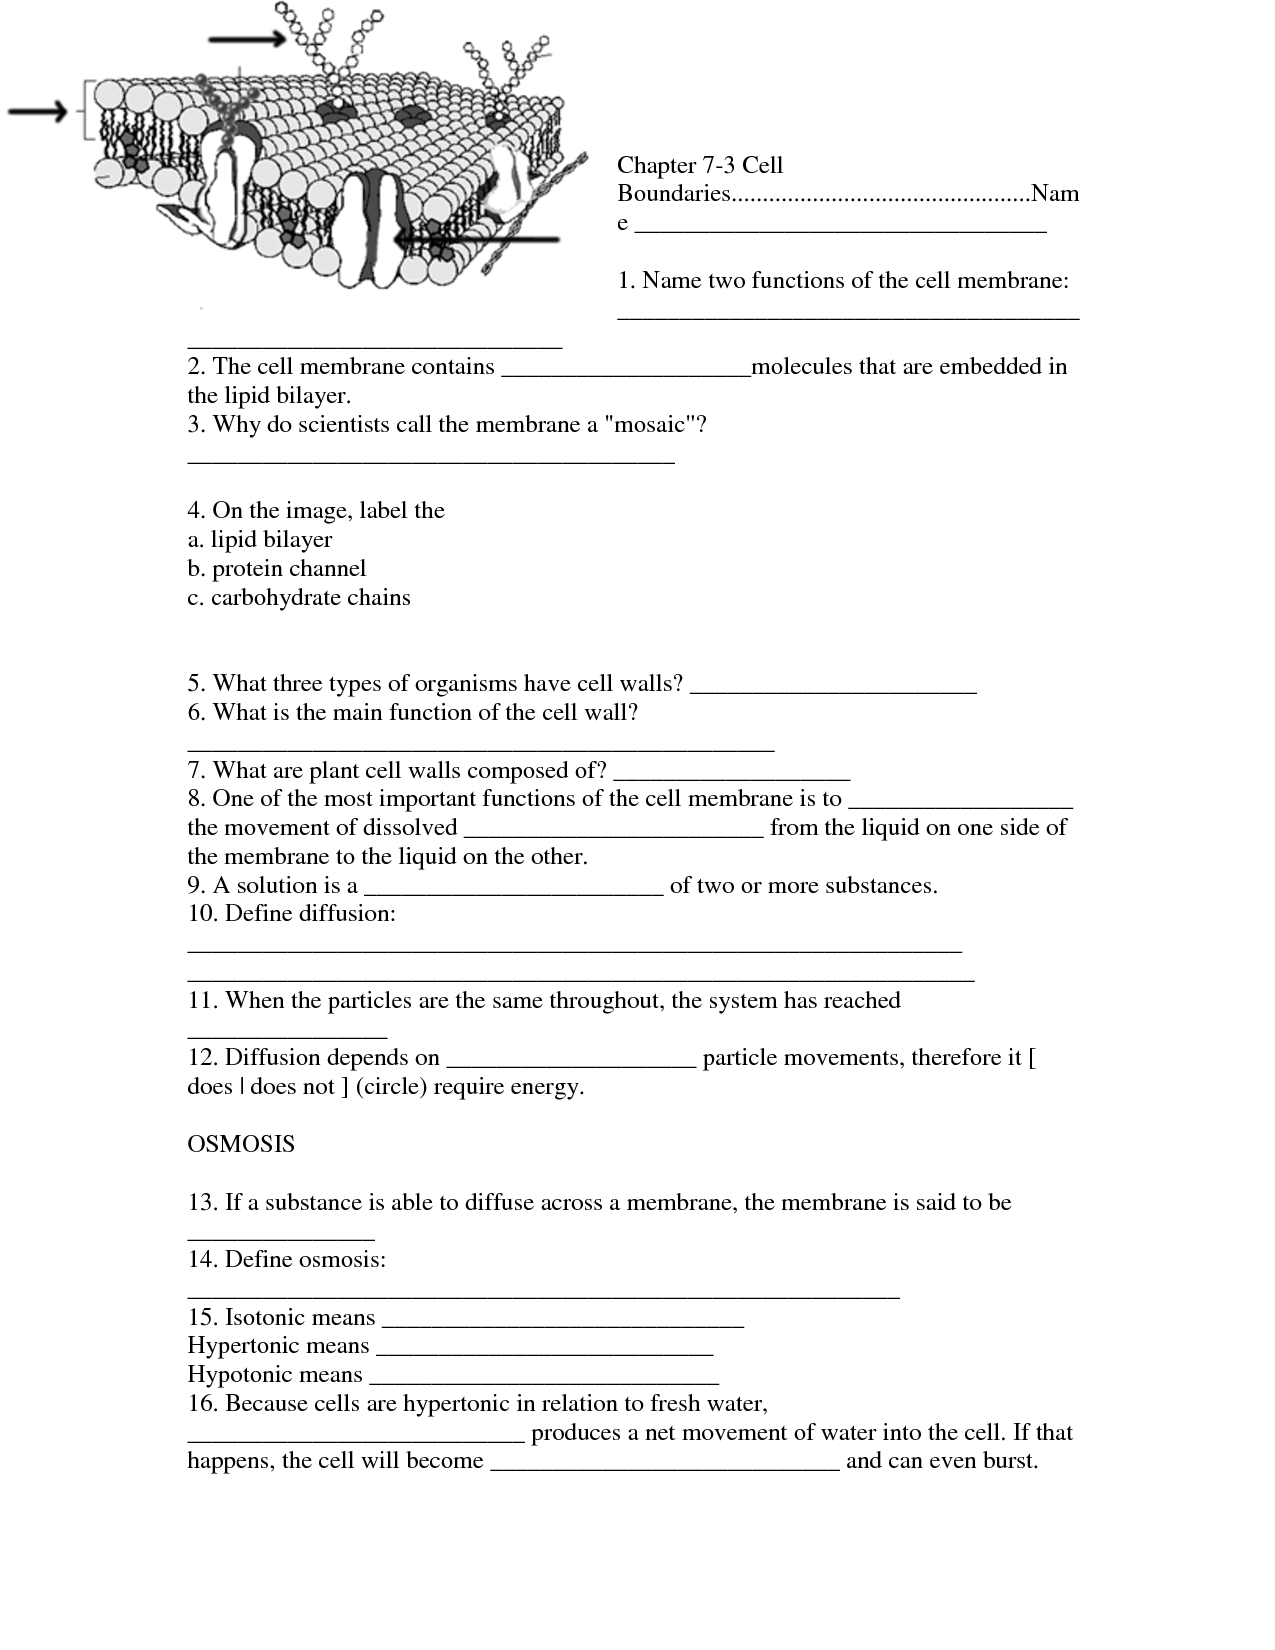 Cell Boundaries Worksheet Answers Image